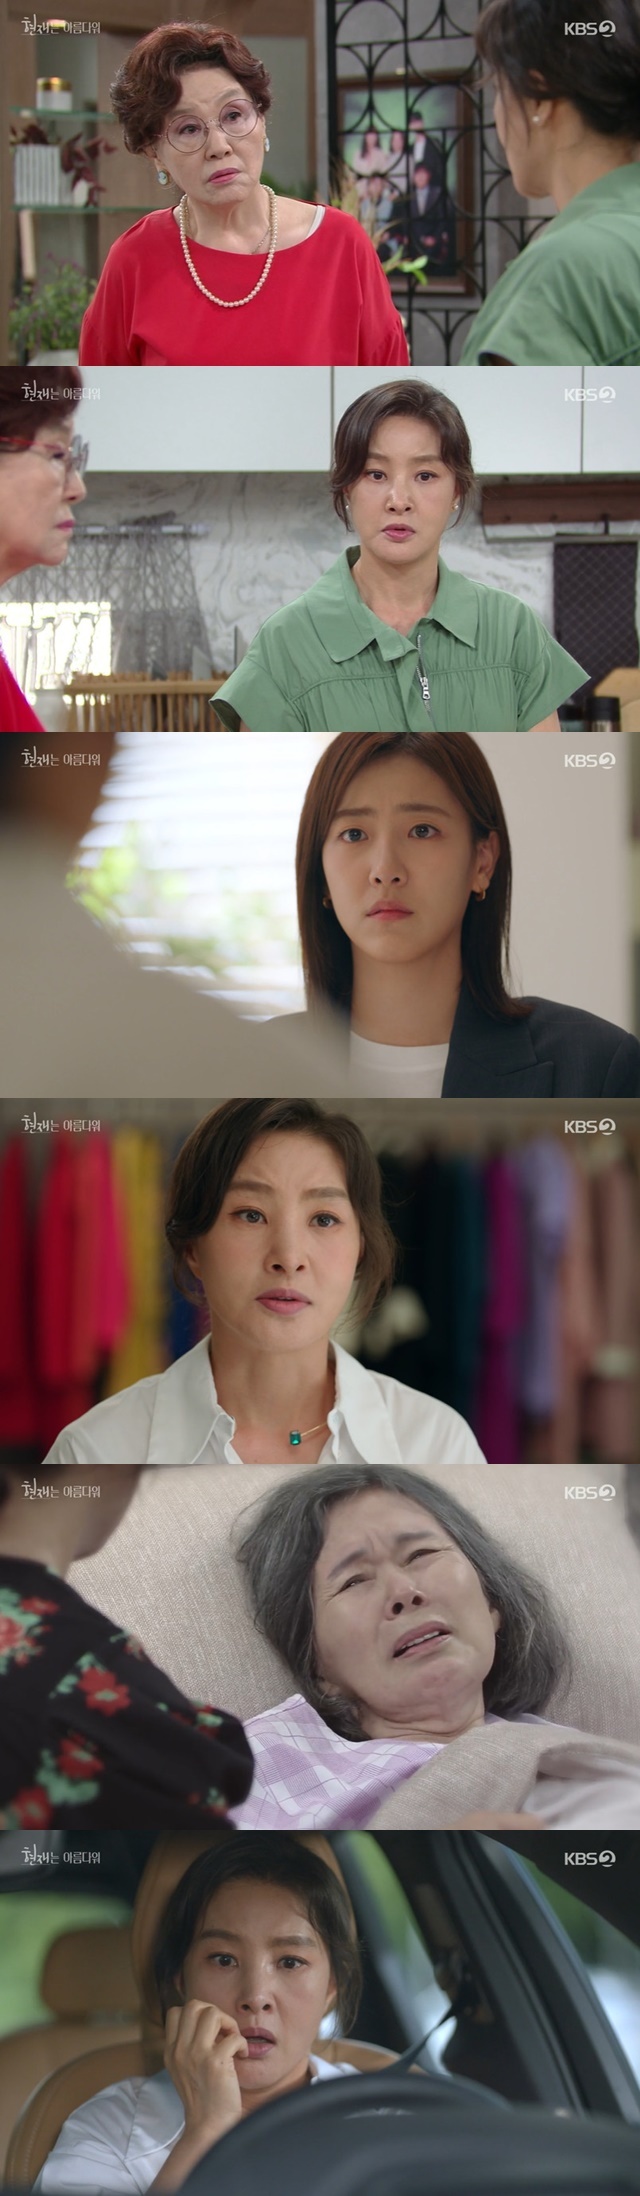 Park Ji-Young was alarmed to realize the truth her adoptive parents were hiding.In the 40th episode of KBS 2TVs weekend drama It\s Beautiful Nowplayplayplay by Ha Myung-hee/director Kim Sung-geun), which aired on August 14, Jin Soo-young (Park Ji-Young) realized that the adoptive parents did not take him to the police station on purpose.Jin Soo-jeong had found his father, Lee kyung-cheol (Park In-hwan), and understood why Lee kyung-cheol had left him in the nursery for a while.Lee kyung-cheol left his mark on his body for a while because he was afraid to move to his daughter Jin Soo-jeong when he got tuberculosis when he lost his wife and spent all the money he had collected for his wifes hospital expenses.Young Jin Soo-jeong was adopted after meeting his adoptive parents while wandering out of the nursery to find his father.Jin Soo-jeong began to open his heart to Lee kyung-cheol, but expressed his affection for his adoptive parents, saying, My parents are Jin Tae-hyun Jung Mi-young (Lee Joo-sil), and because of himself, his daughter, Bae Da-bin, I felt sick to be in it.However, Yoon Jeong-ja (Ban Hyo-jung) of Shimo took the lead in the separation of the two, saying, We only need to pass this period.When I think about it, I dont think about Lee kyung-cheol, and I want to pass it on when I think about him, but I think of him as the late master.I wonder why they were so good, so angry and gentle, and why they didnt take the lost kid to the police station.When Jin Soo-jeong said, I had to do that at that time, Yoon Jung-ja said, How do you know that you are only four years old.When I met you three years ago, I told you how you had this daughter, and you stole it from the sky, and you were the perfect daughter.I dont think he took you to the police station on purpose.When Jin Soo-jeong denied that he was not my parents, Yoon Jung-ja replied, Or not. Anyway, the deceased children enjoyed the joy of raising you.Then Jin Soo-jeong watched his daughter, Future, struggle with separation, chewed on the words of Shimo Yoon Jung-ja, and said, I was bad before my mother Jung Mi-young died.I did something I couldnt do to you. I didnt want to hear you say you couldnt have children.I wanted to do anything if I could have a child. But I shook my head, Mom said, I can not do that.But Jung Mi-young said, You saw the graffiti on her body? She was abused. You can not take me to the police station. I did not want to hear that I could not have a child.I was sick of the sound of saying that I had no children. I was sorry to see a woman and say that I had come to that.Memory Jin Soo-jeong was surprised to say, Mom!